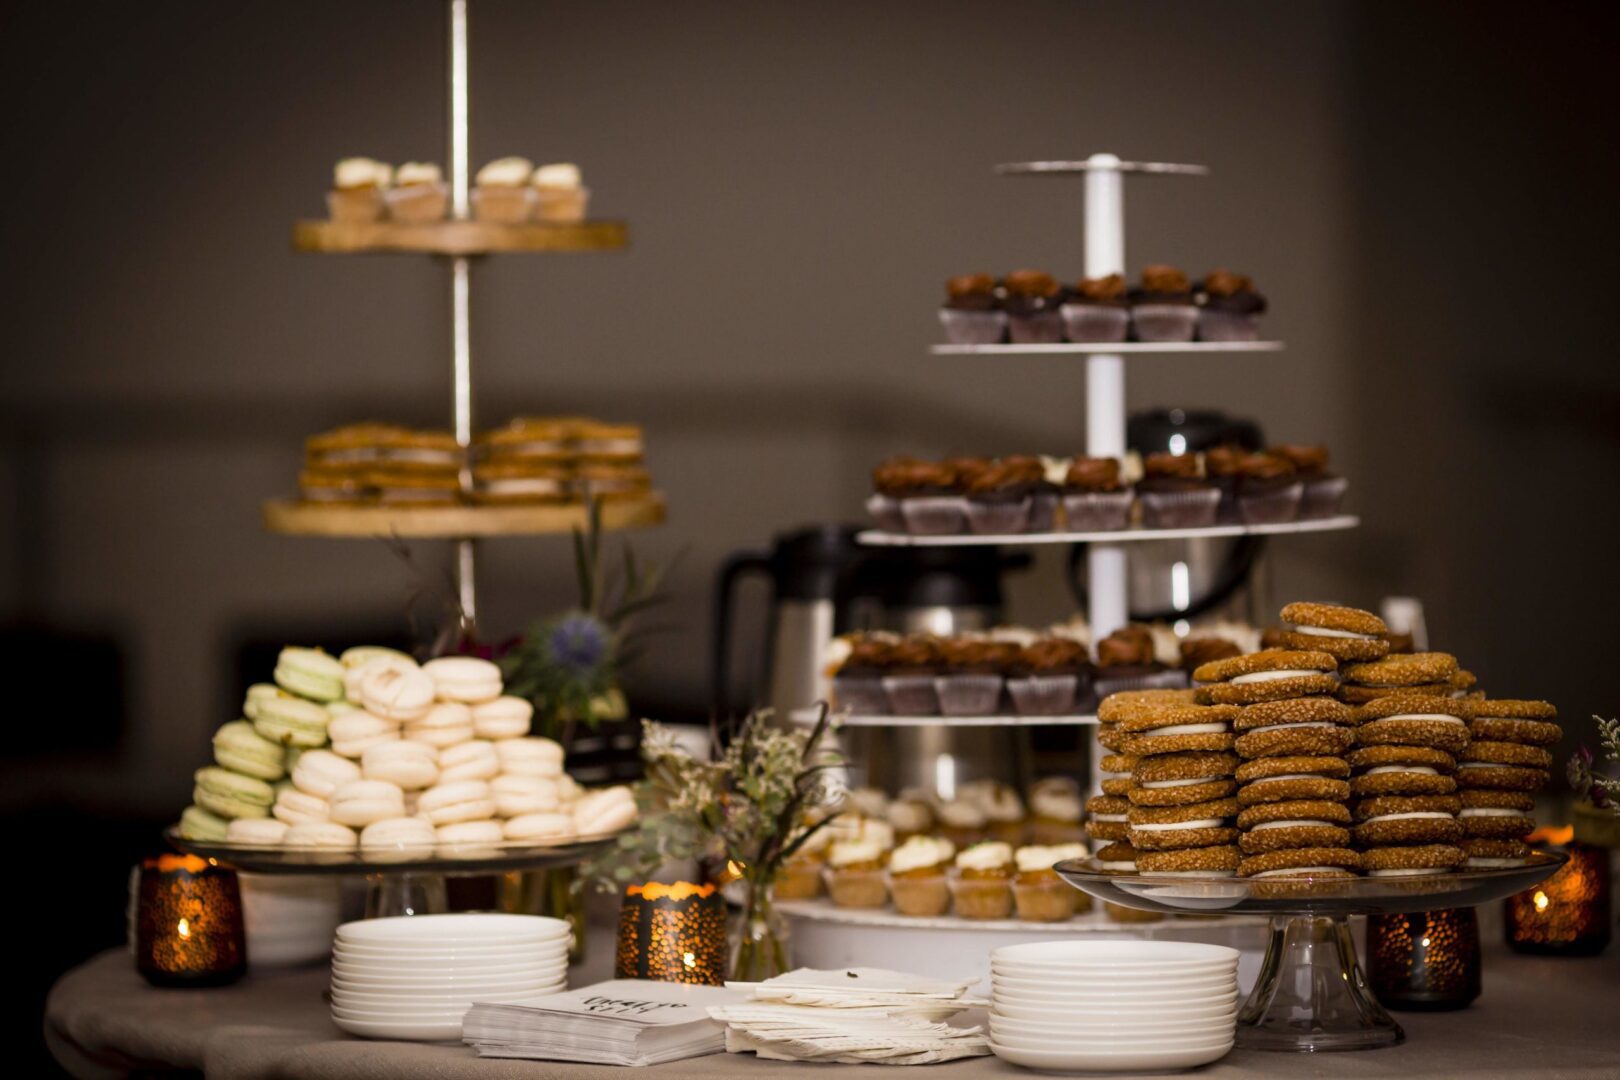 A dessert table with a variety of desserts on it.